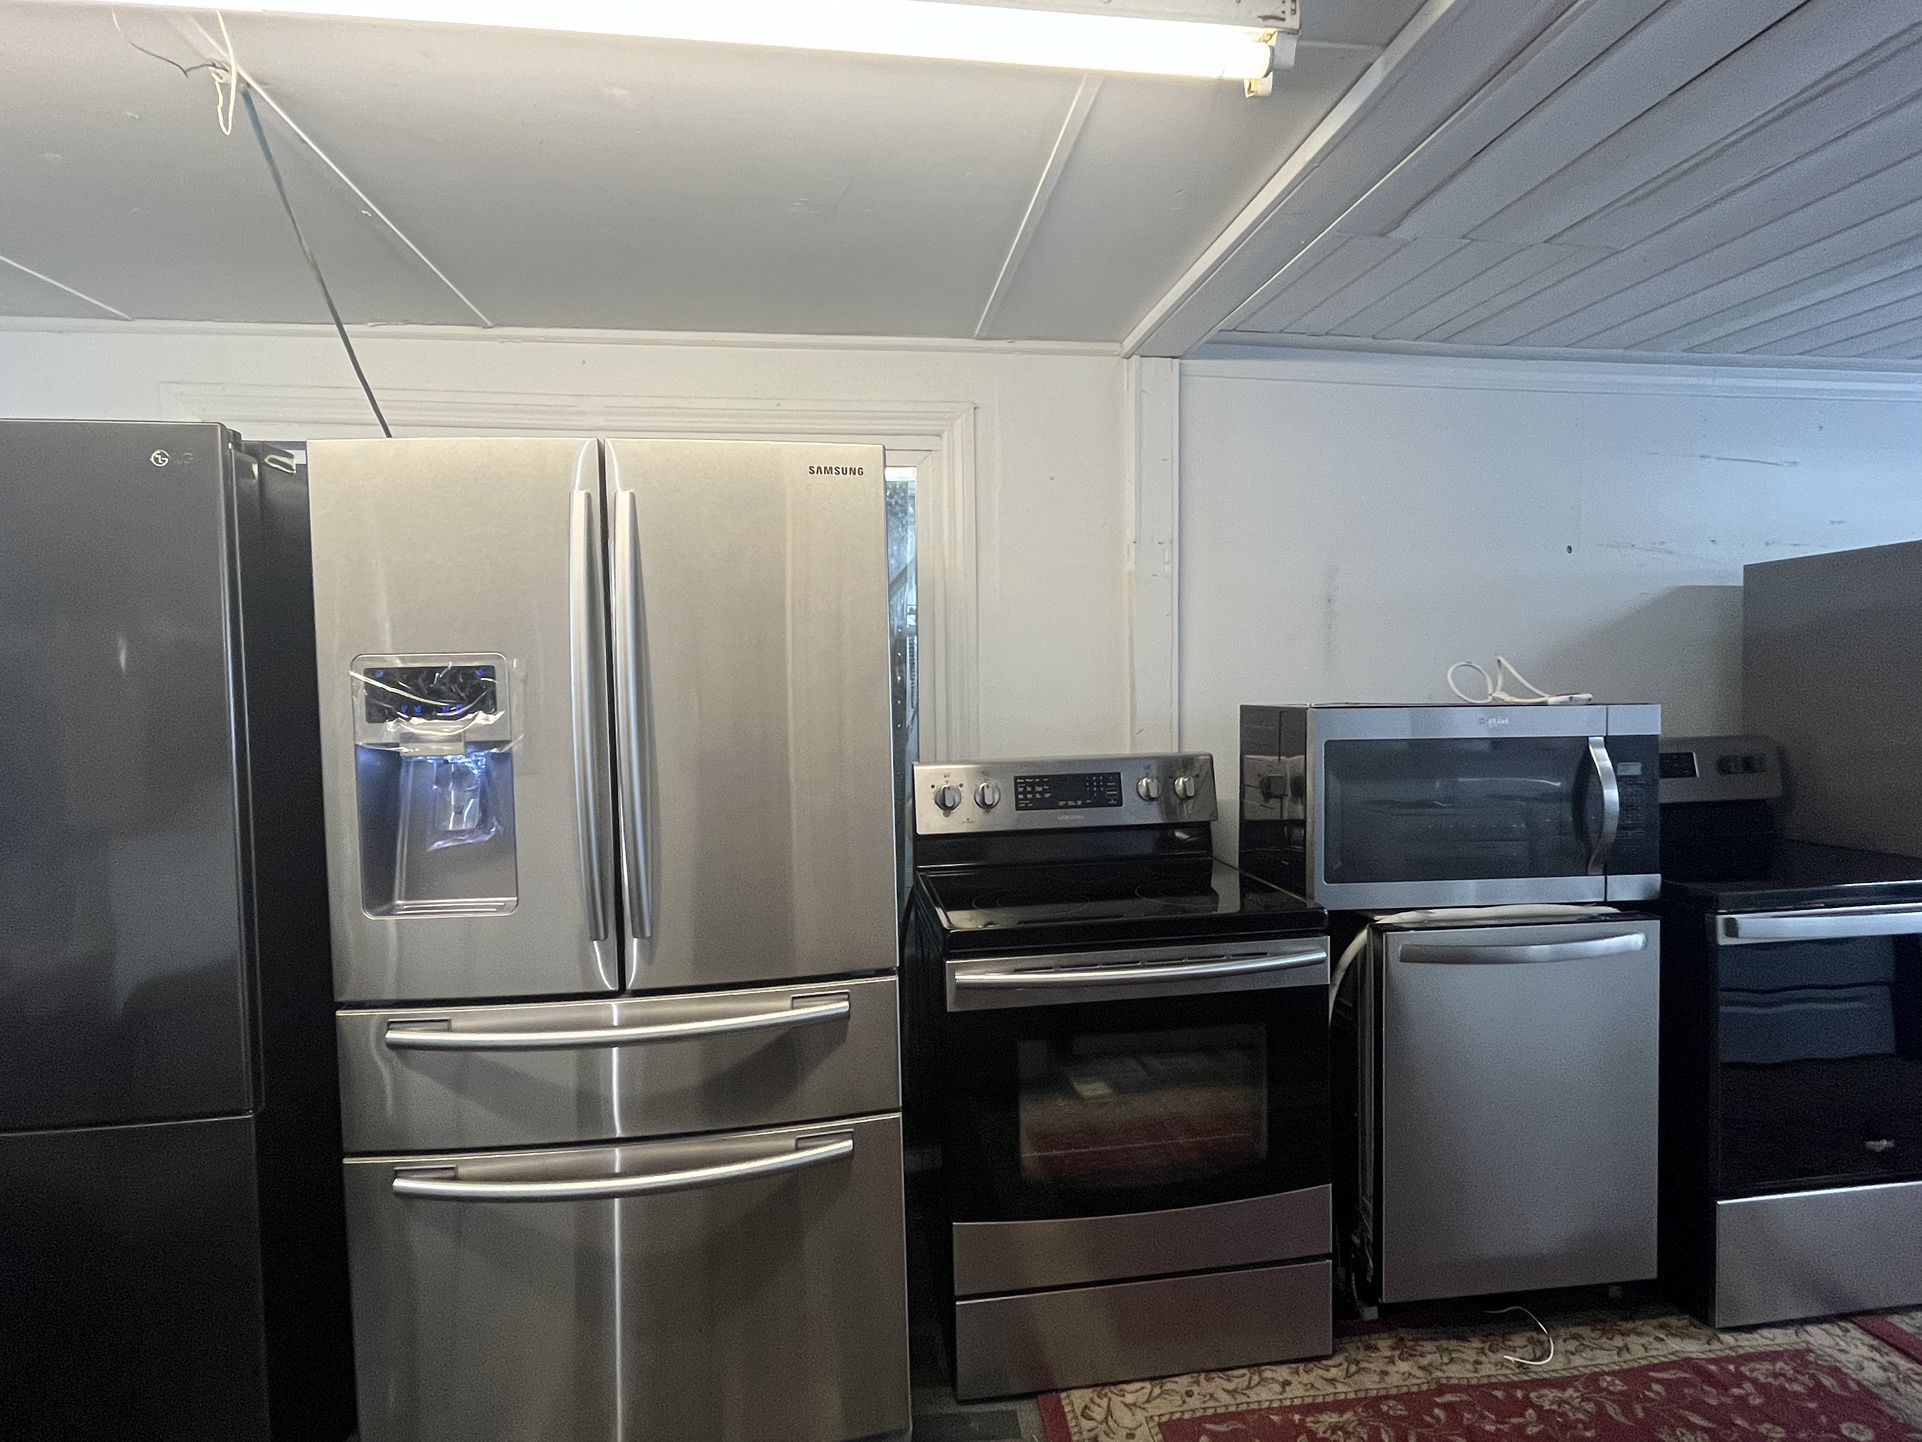 Refrigerador,stove,dishwasher And Microwave Stainless Steel 